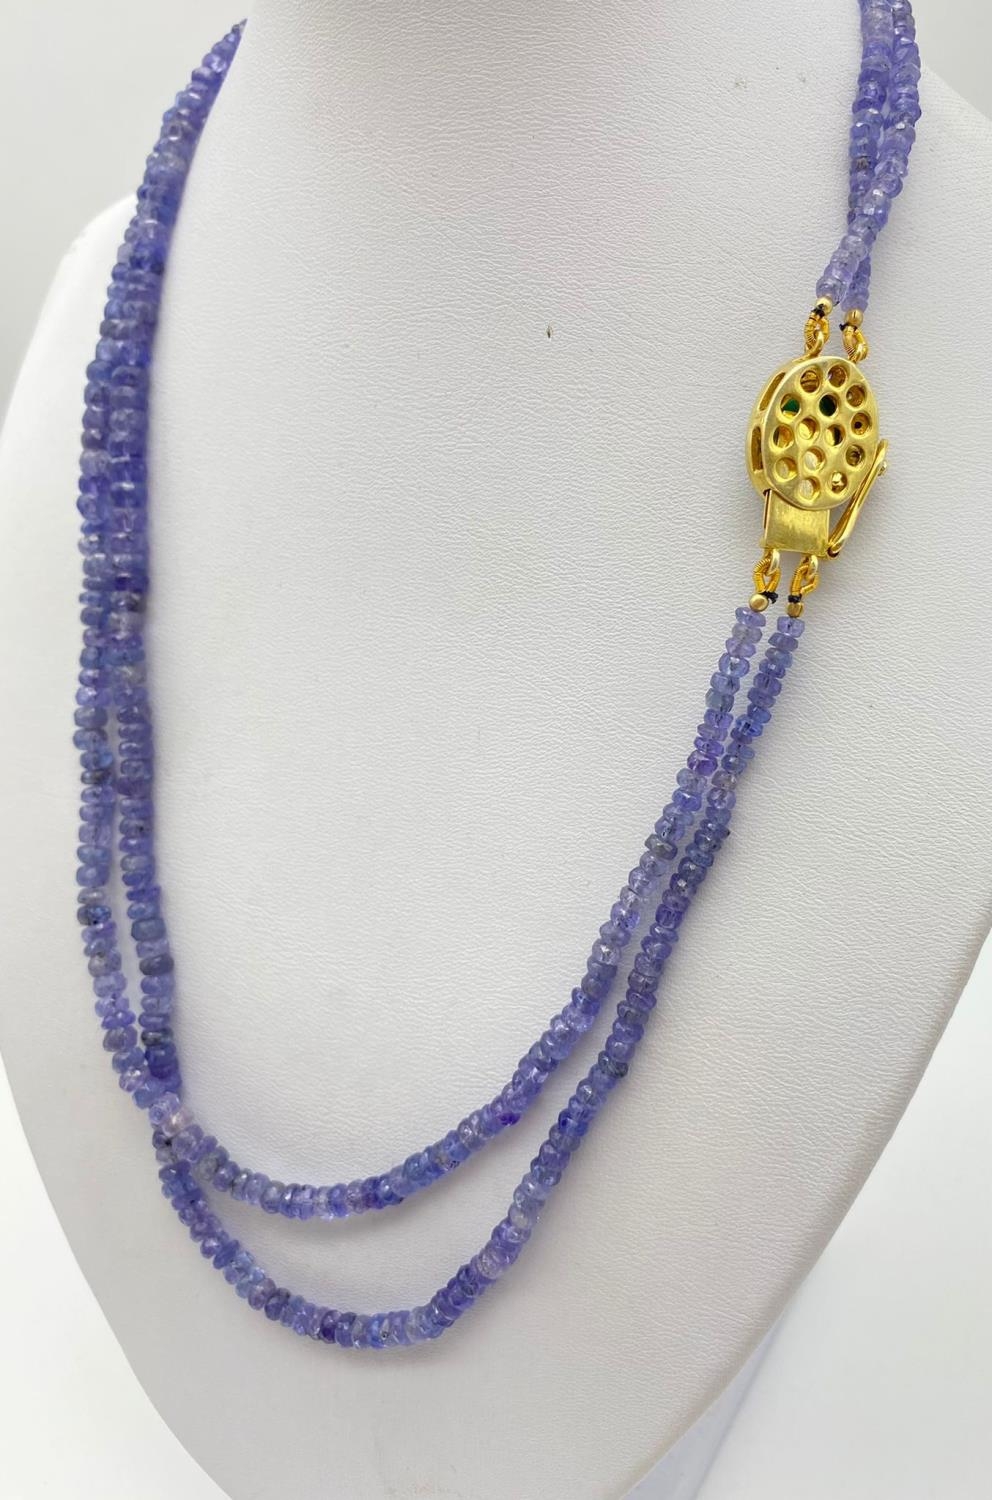 200cts Two-Row Tanzanite Gemstone Necklace with Emerald clasp circled with a halo of diamonds. 46cm - Image 3 of 3